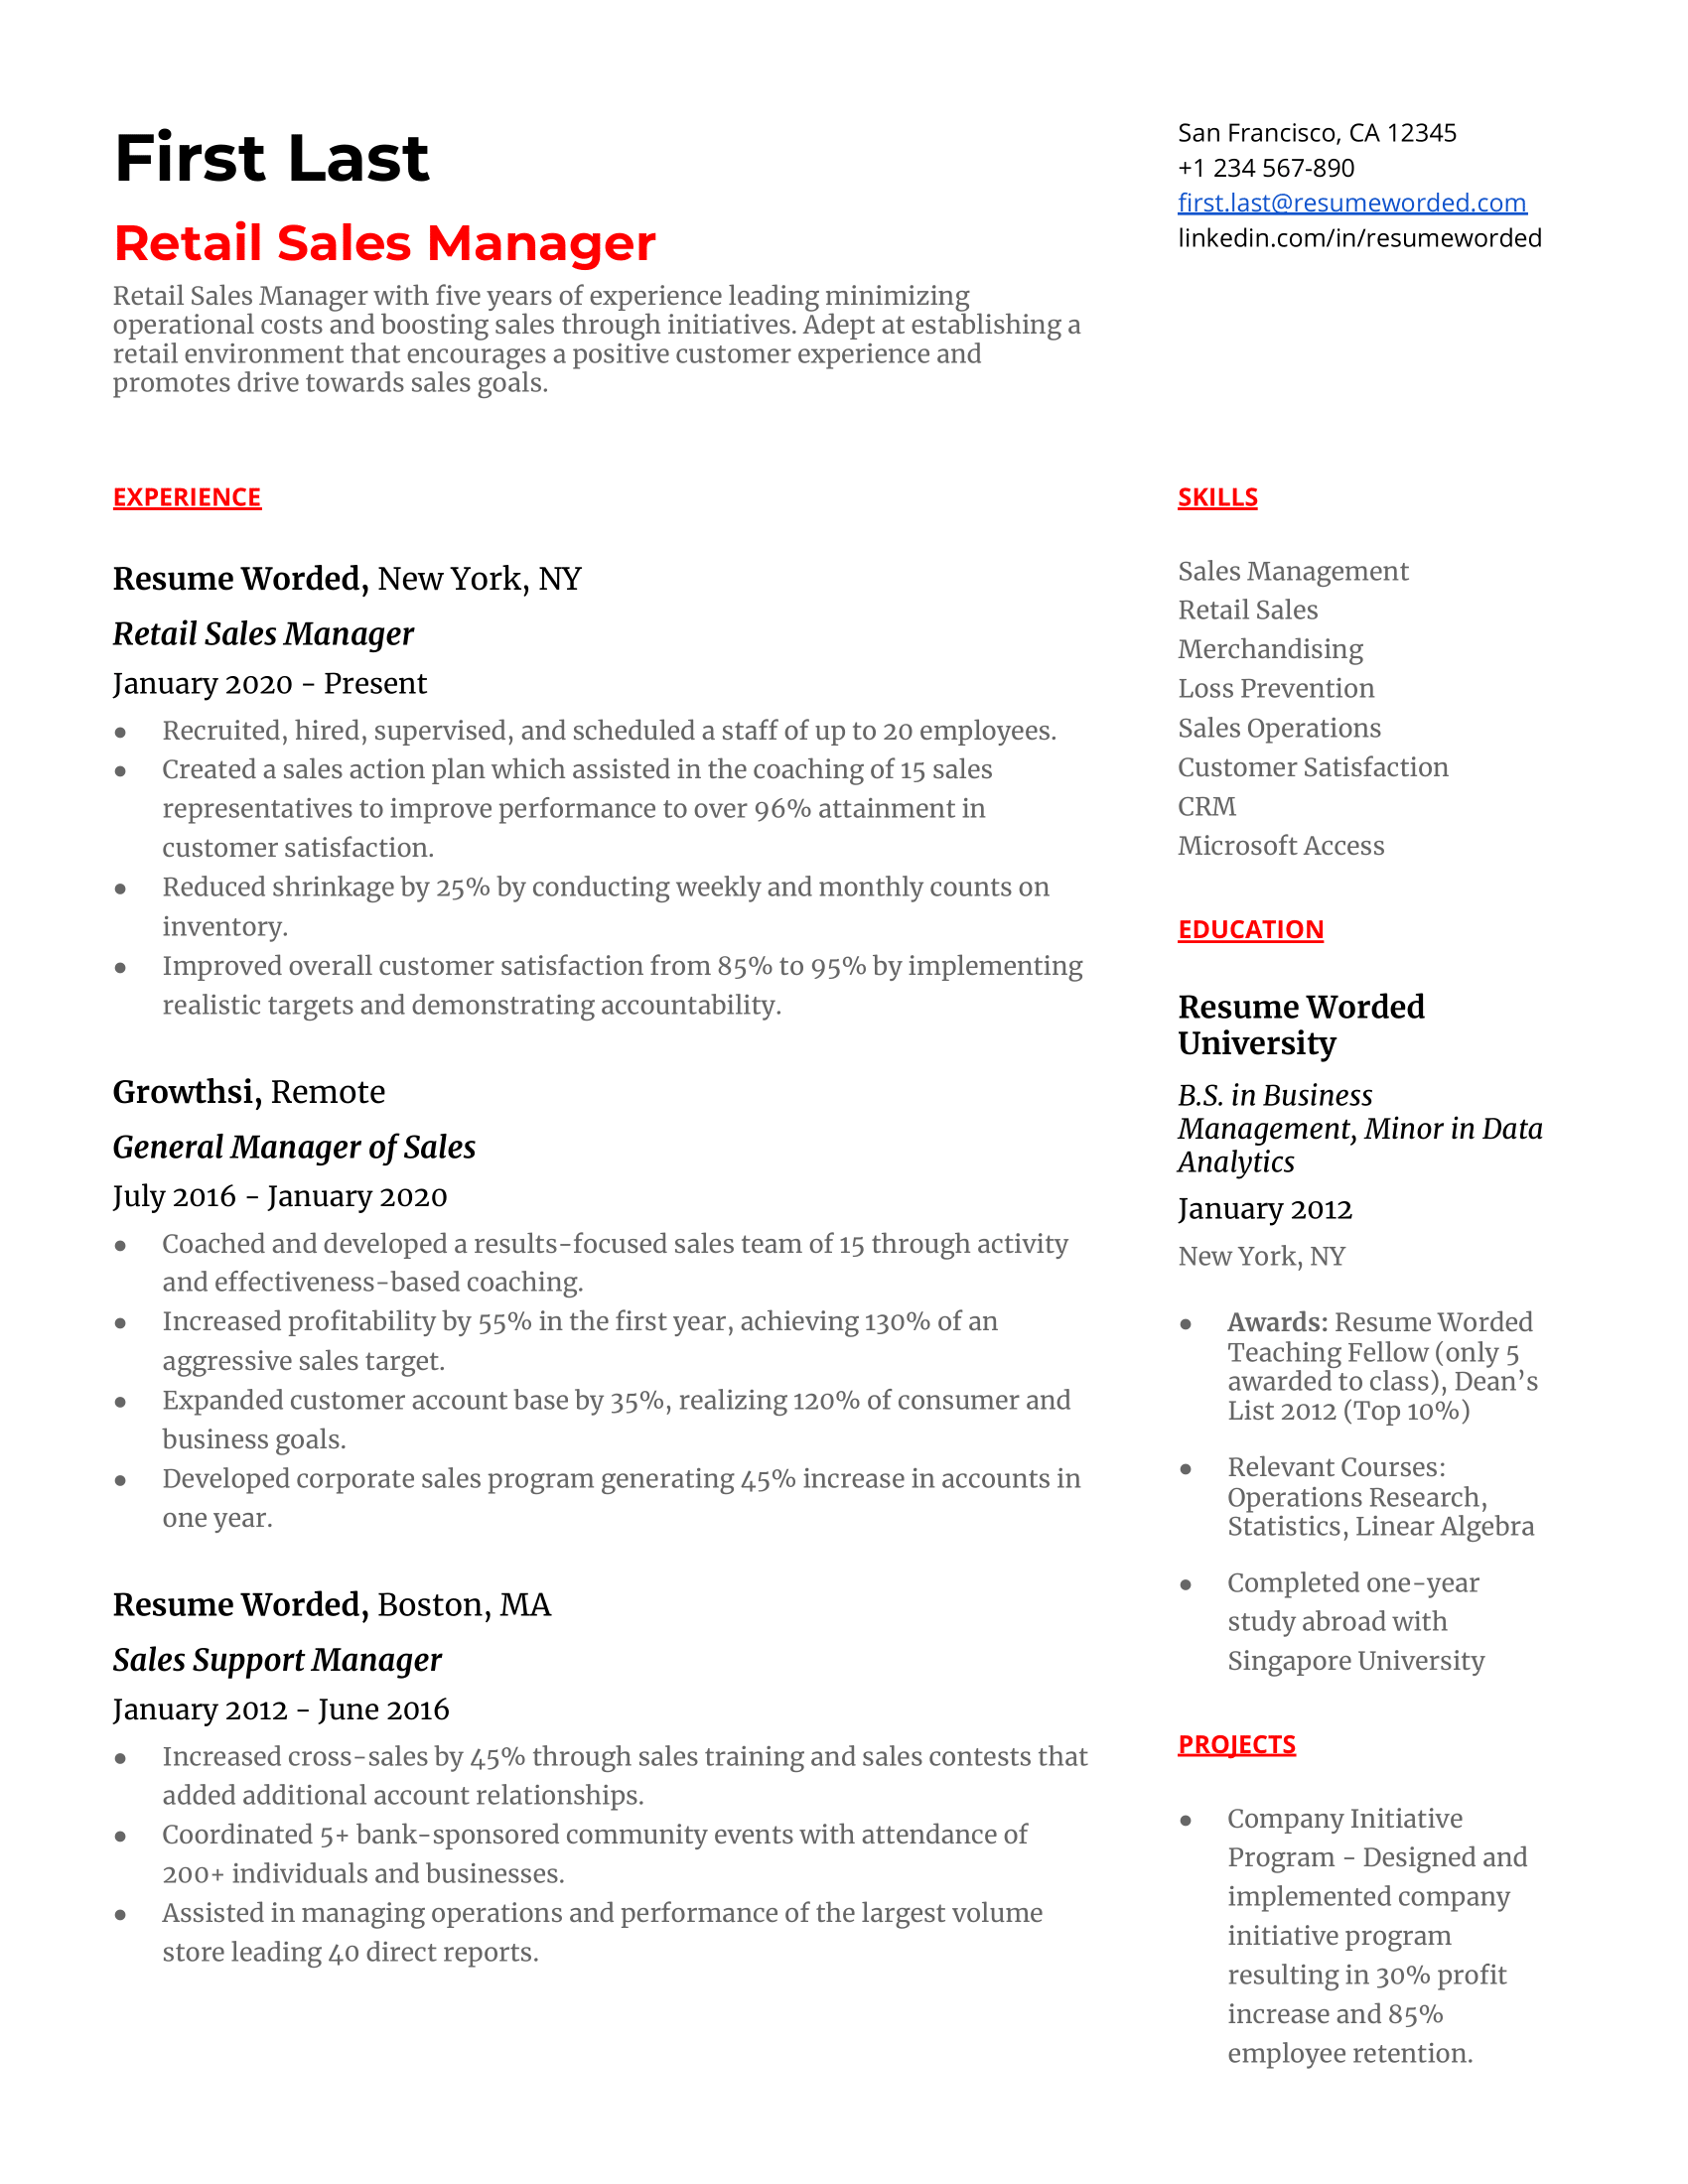 A resume for a retail sales manager with a bachelor's degree and prior experience as a sales support manager.